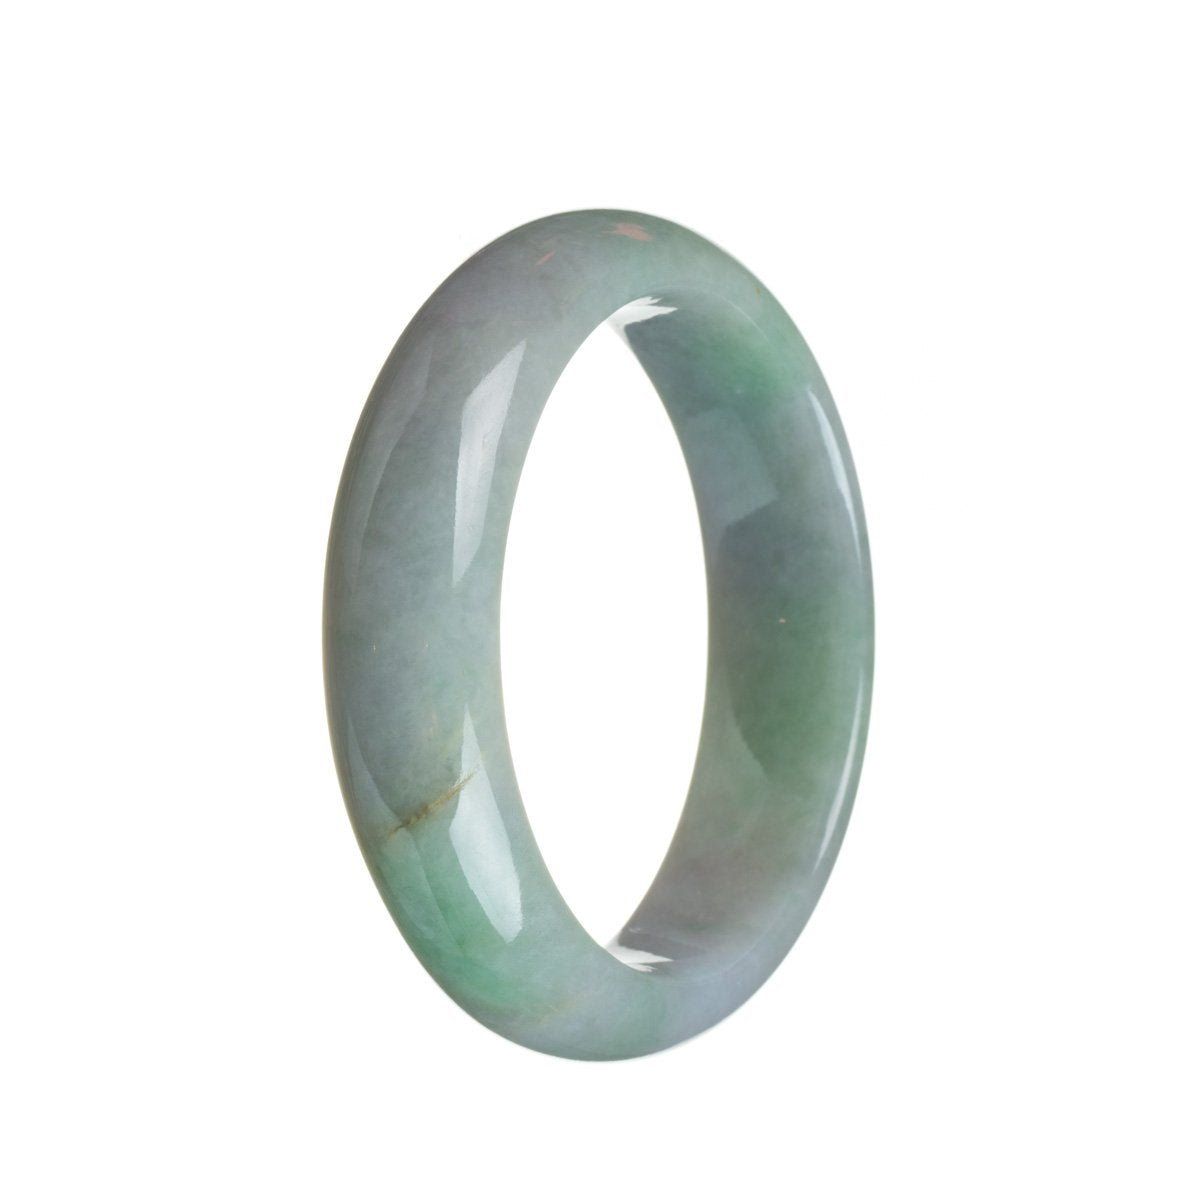 A lavender and green jade bangle bracelet, featuring a half moon design, measuring 55mm in size.